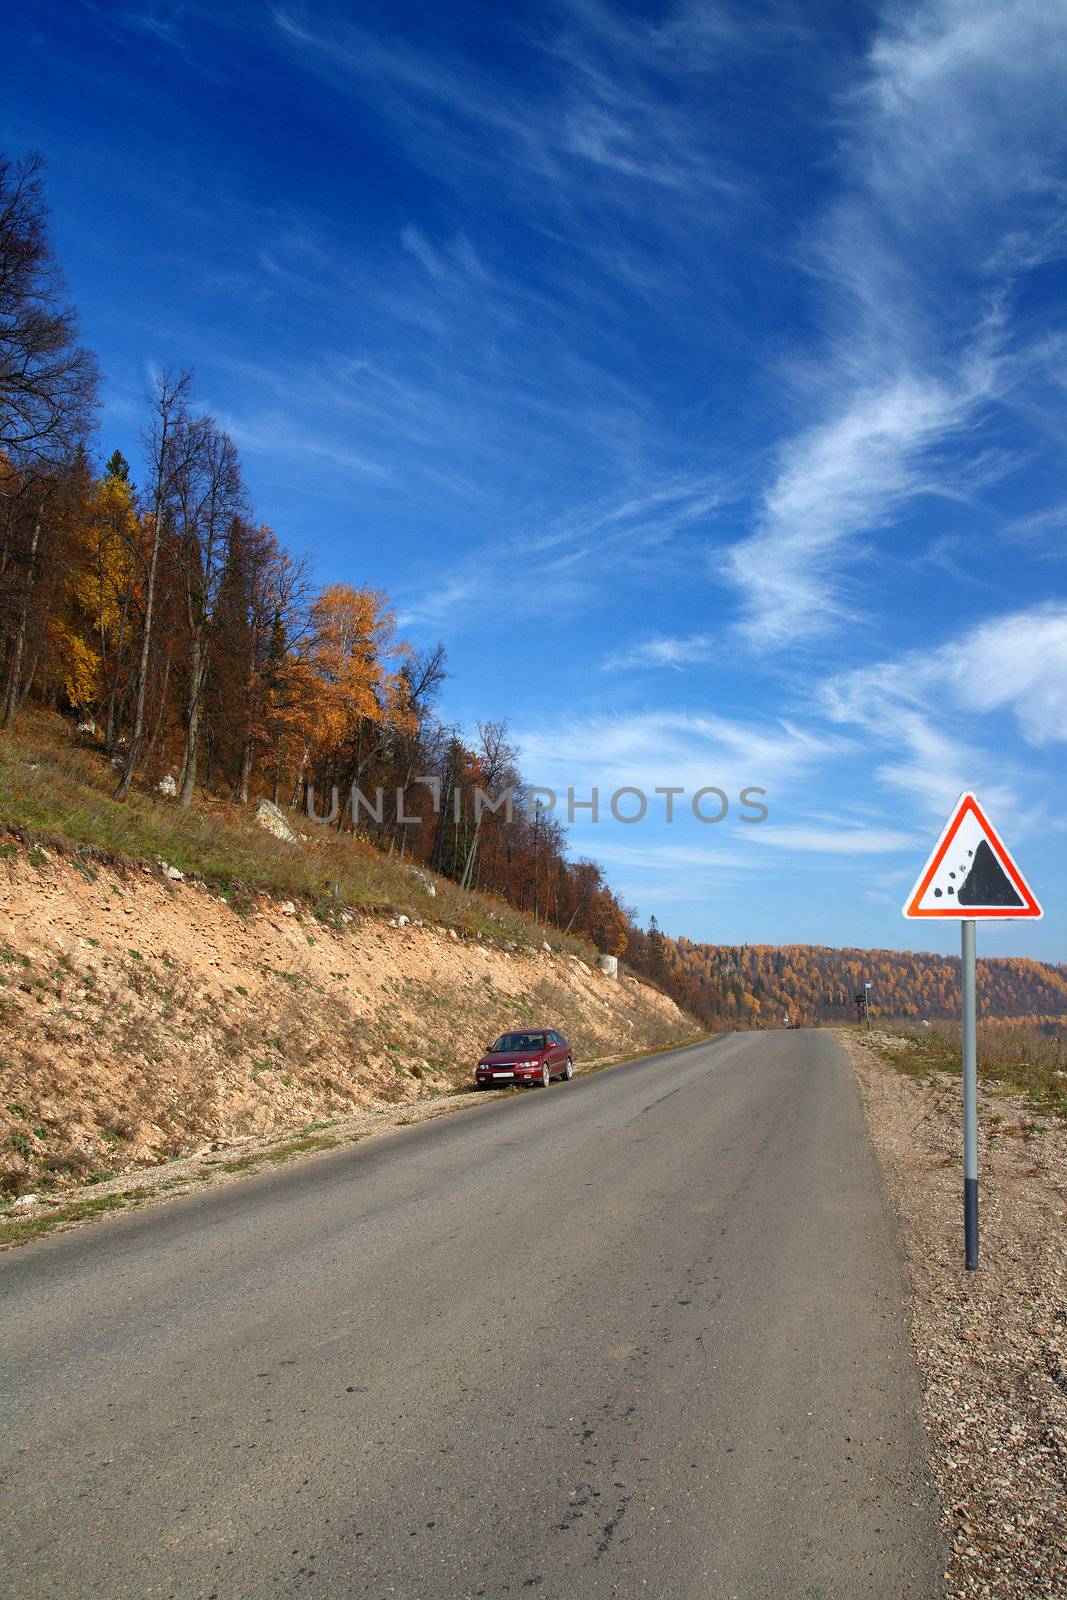 autumn landscape with road by Mikko